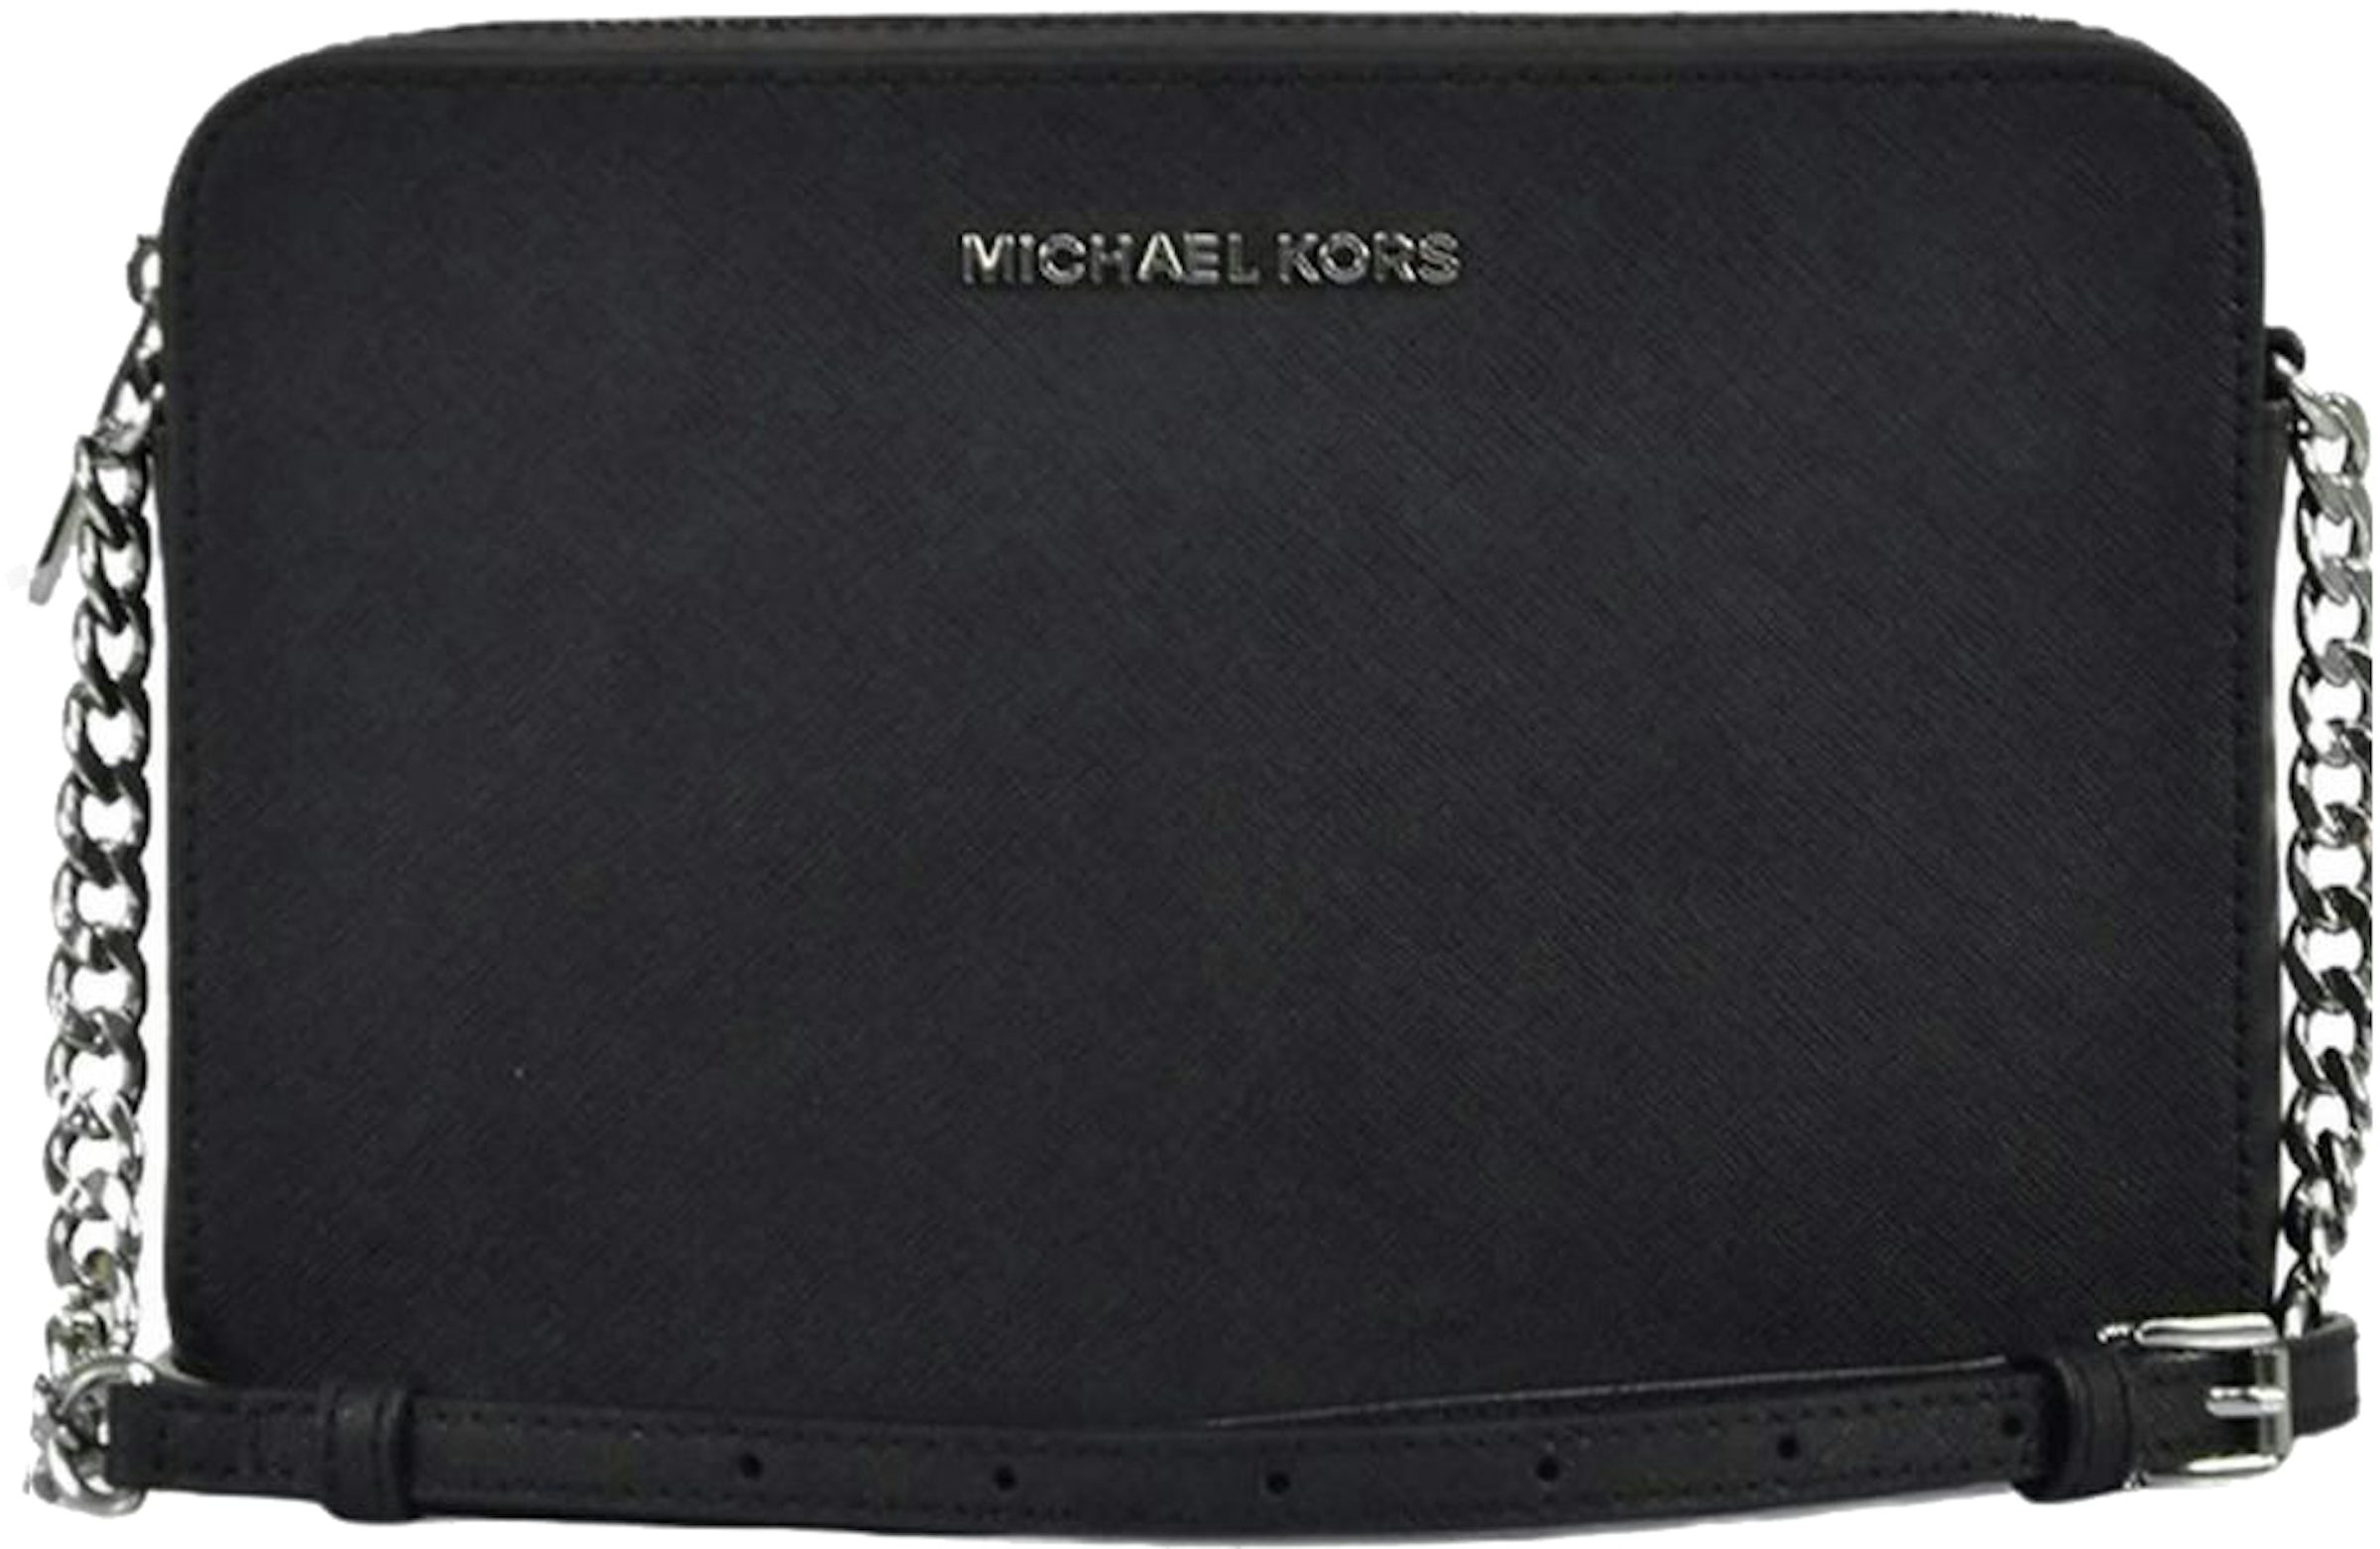 Michael Kors Jet Set East West Crossbody Bag Large Black in Saffiano Leather  with Silver-tone - GB